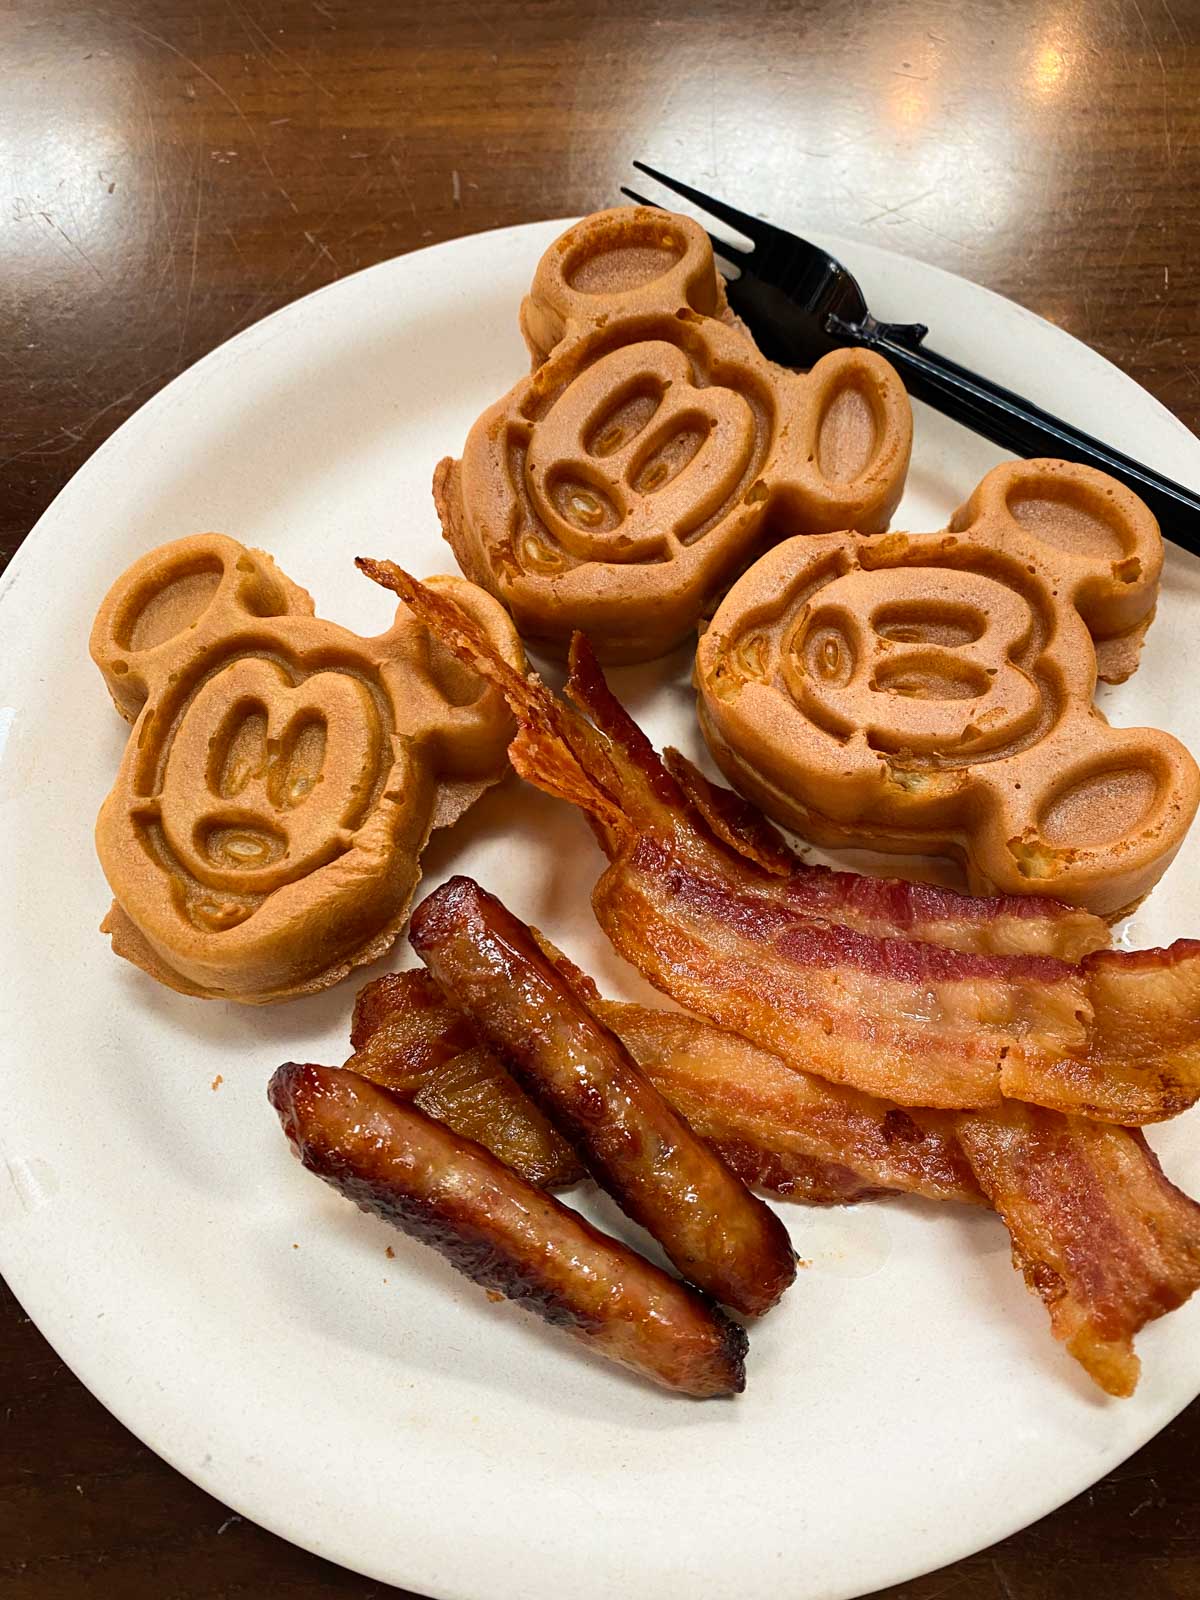 A breakfast platter with Mickey-shaped waffles and breakfast sausage and bacon.